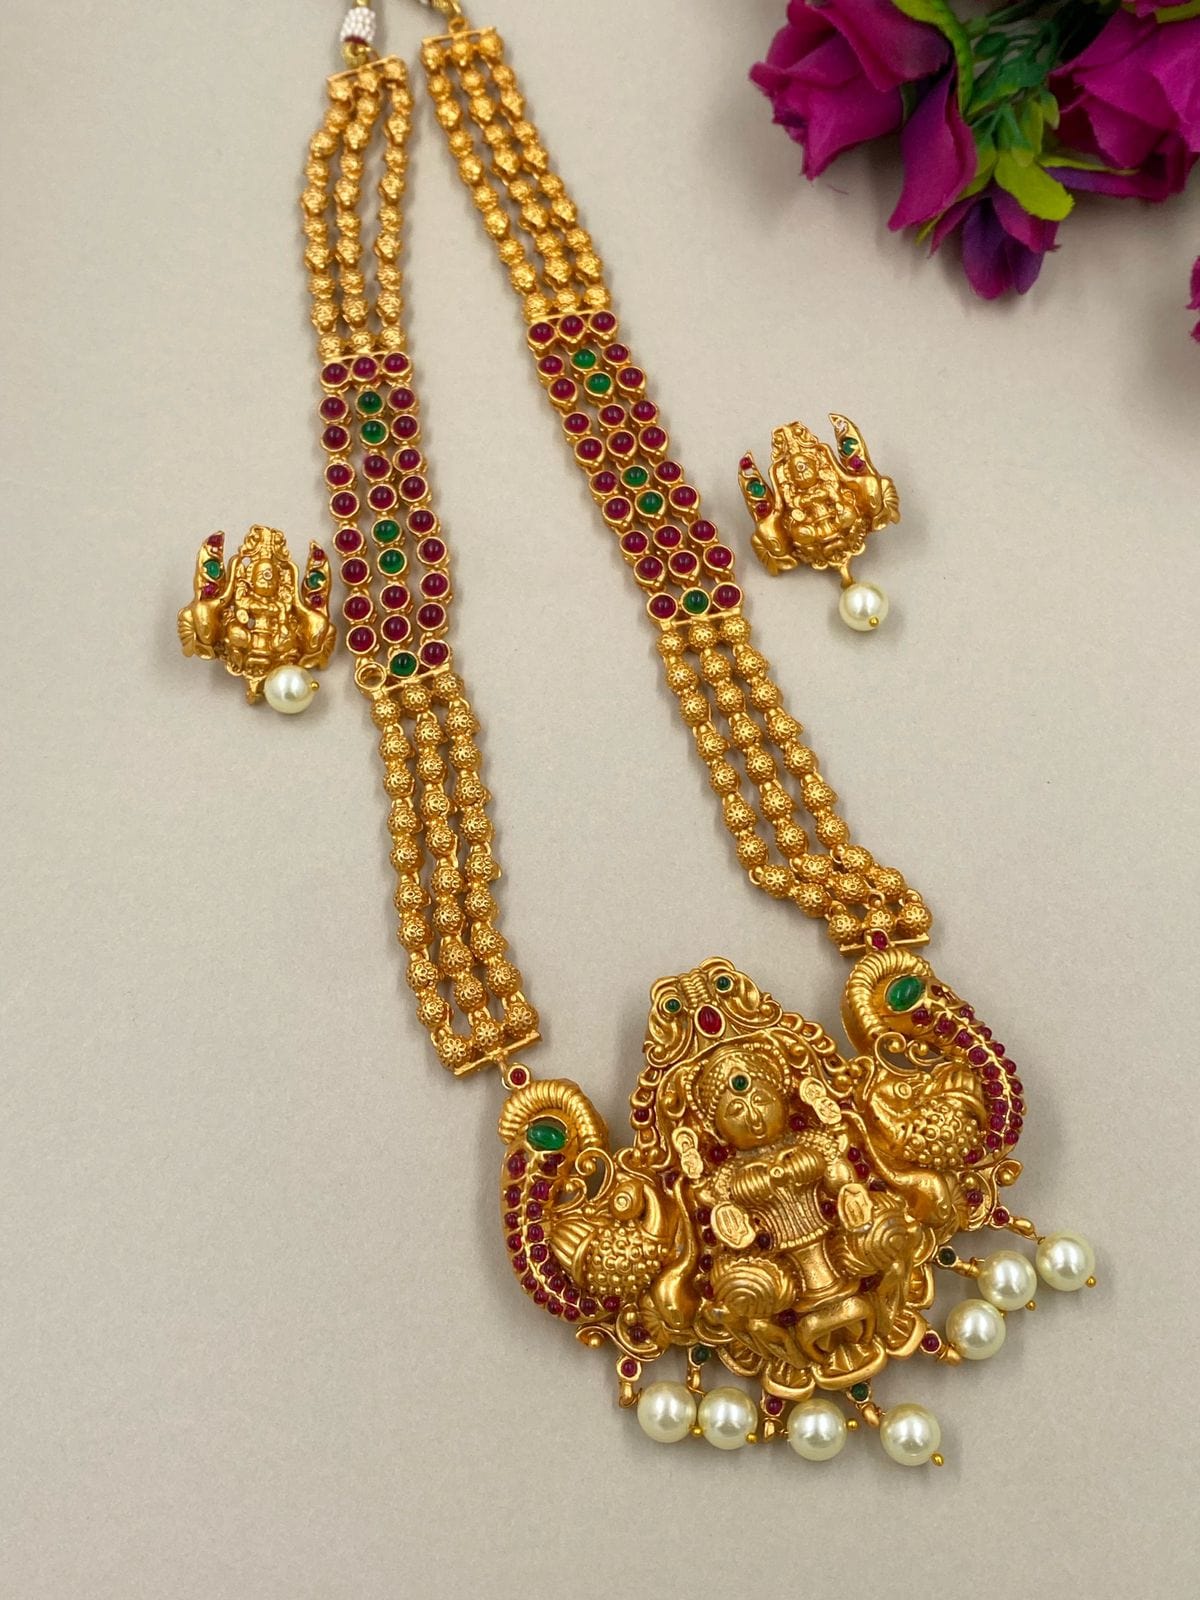 South Indian Goddess Lakshmi Temple Jewelry Set For Women By Gehna Shop Temple Necklace Sets